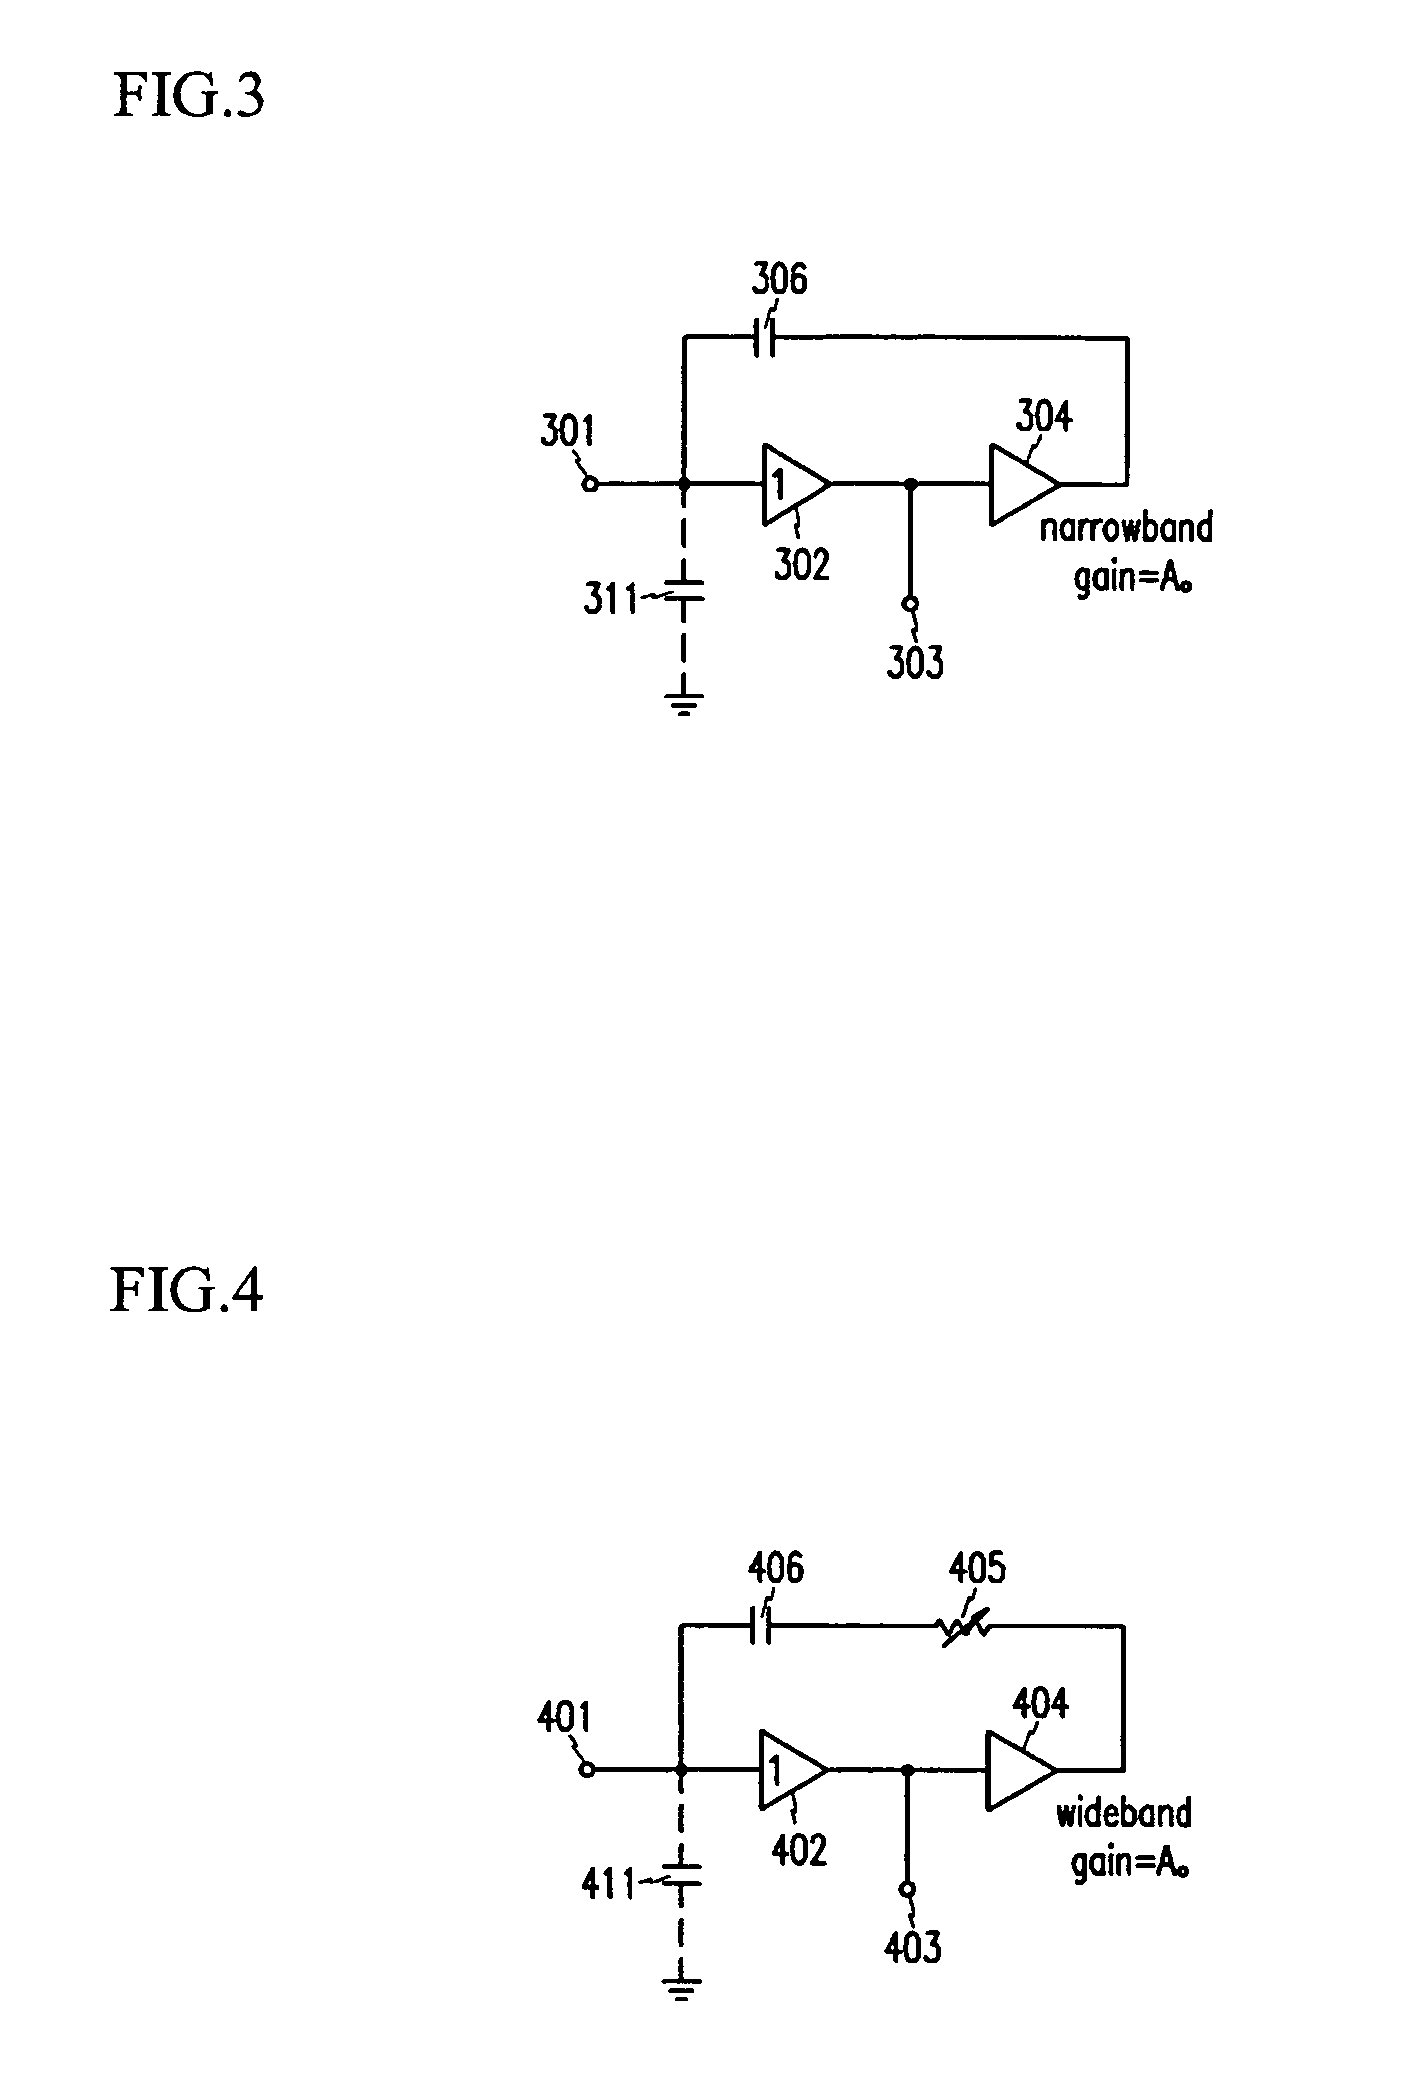 Apparatus for measuring electrical impedance